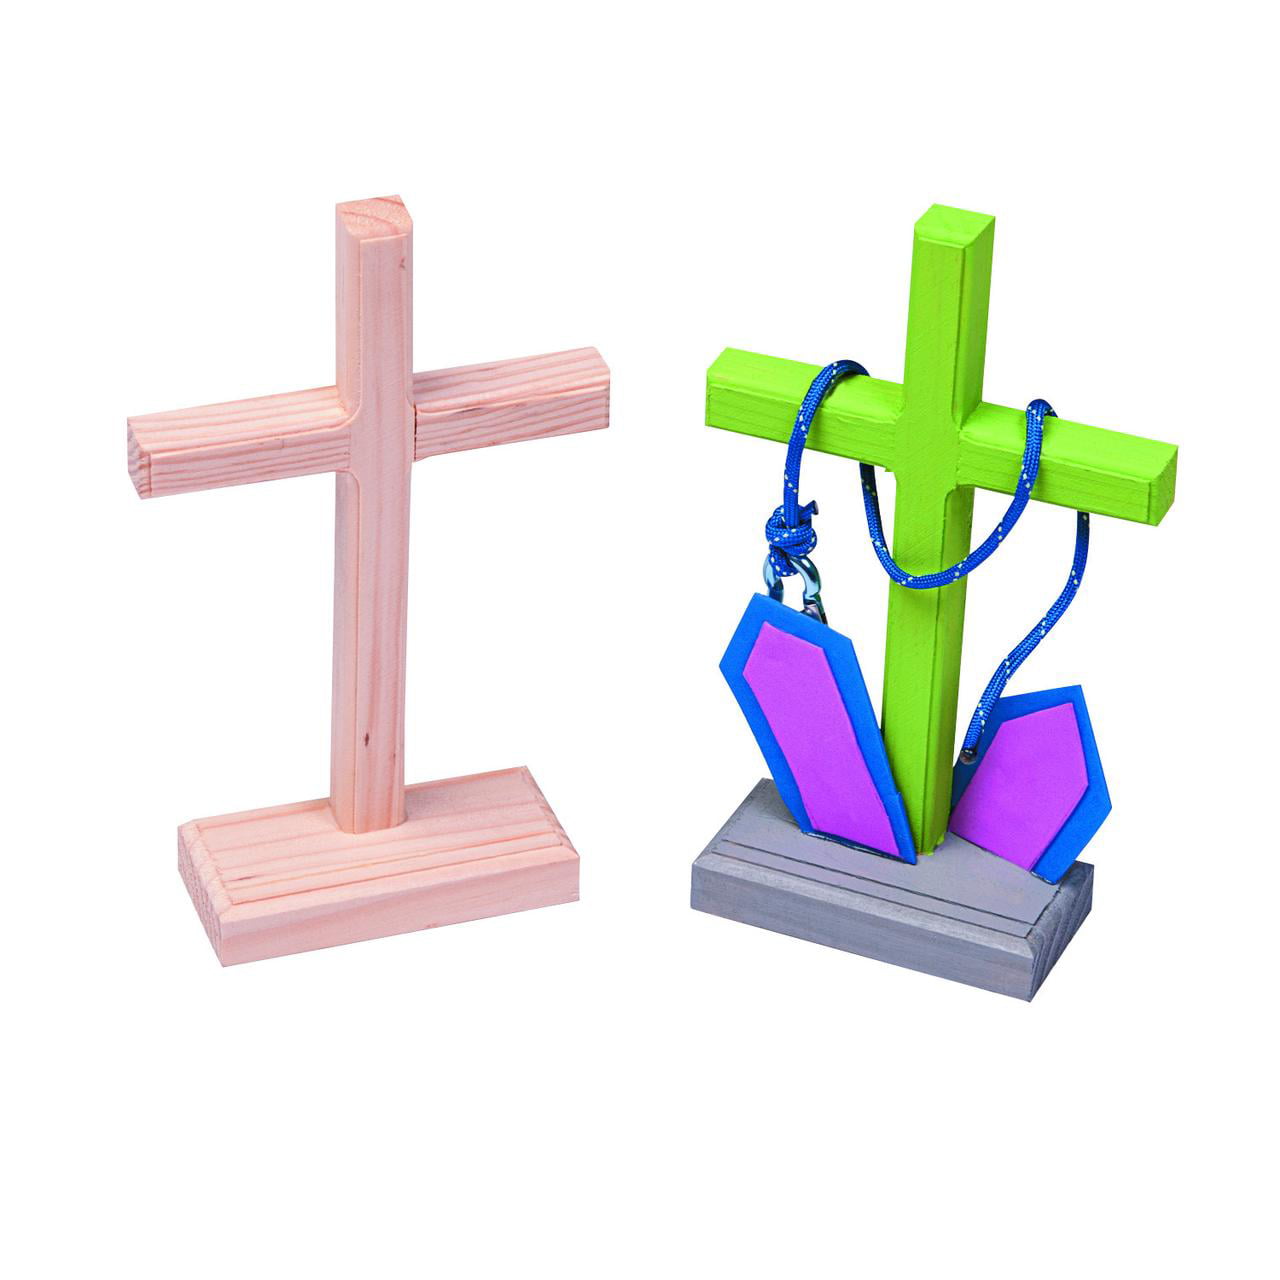 Shop 200 Pieces Wooden Crosses for Crafts Cro at Artsy Sister.